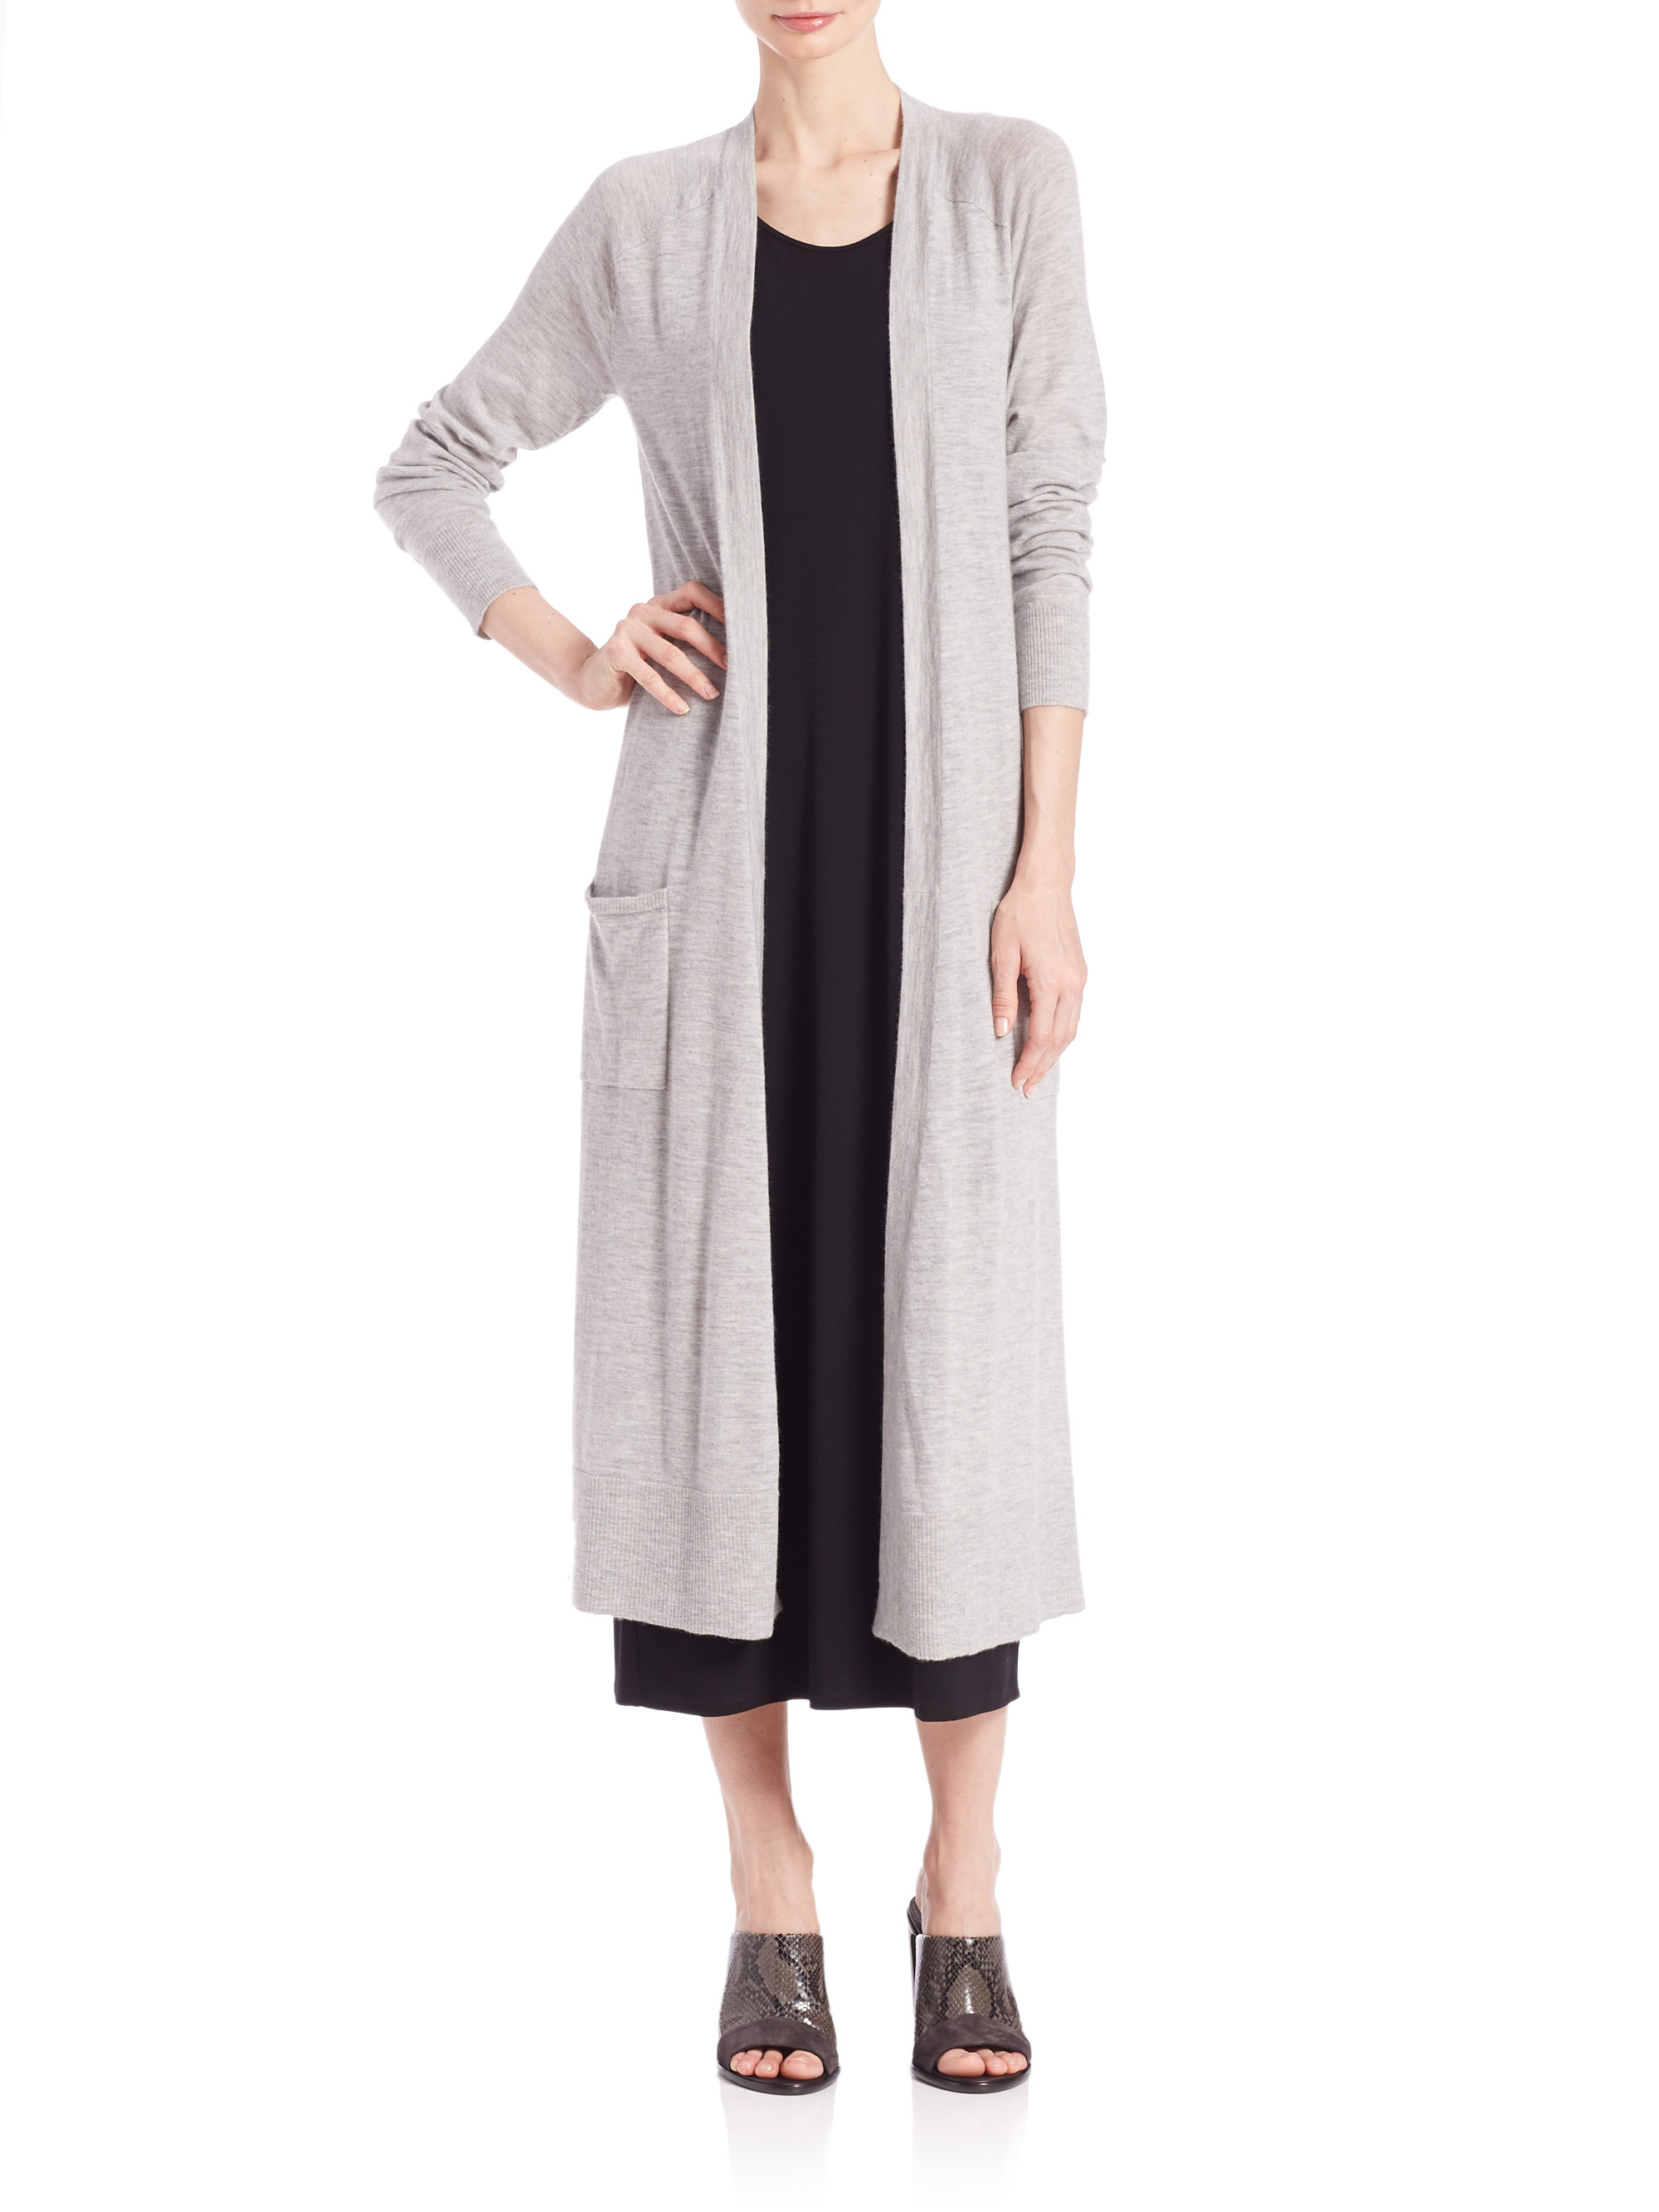 Cashmere Long Cardigan Sale - Cardigan With Buttons